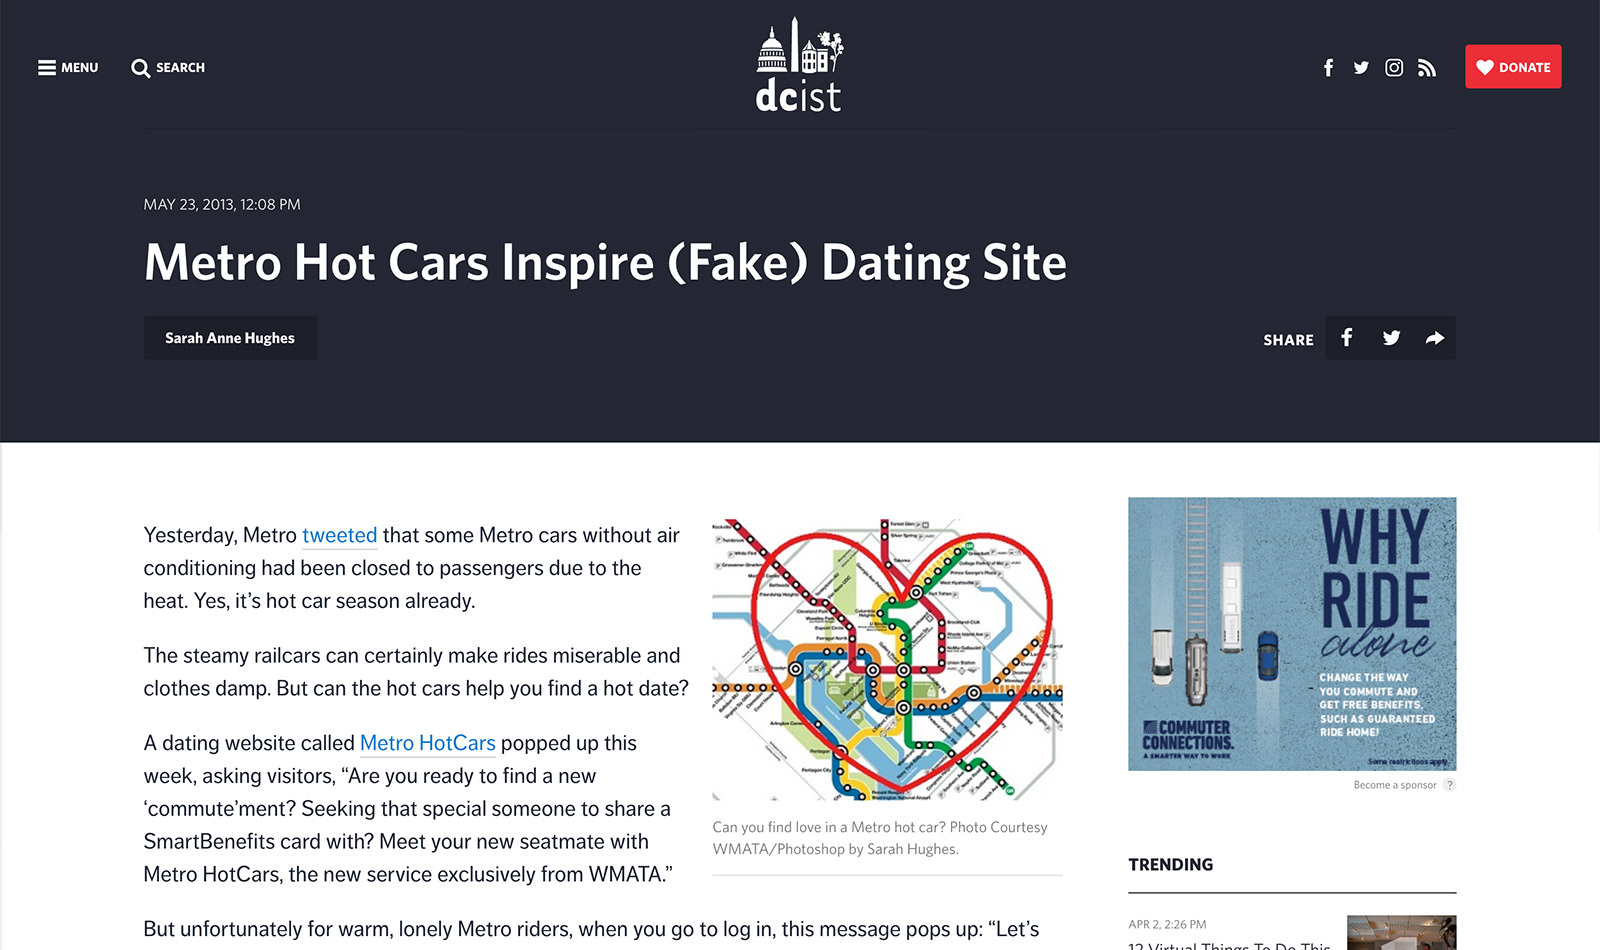 DCist coverage of the Metro HotCars site: "Metro Hot Cars Inspire (Fake) Dating Site"